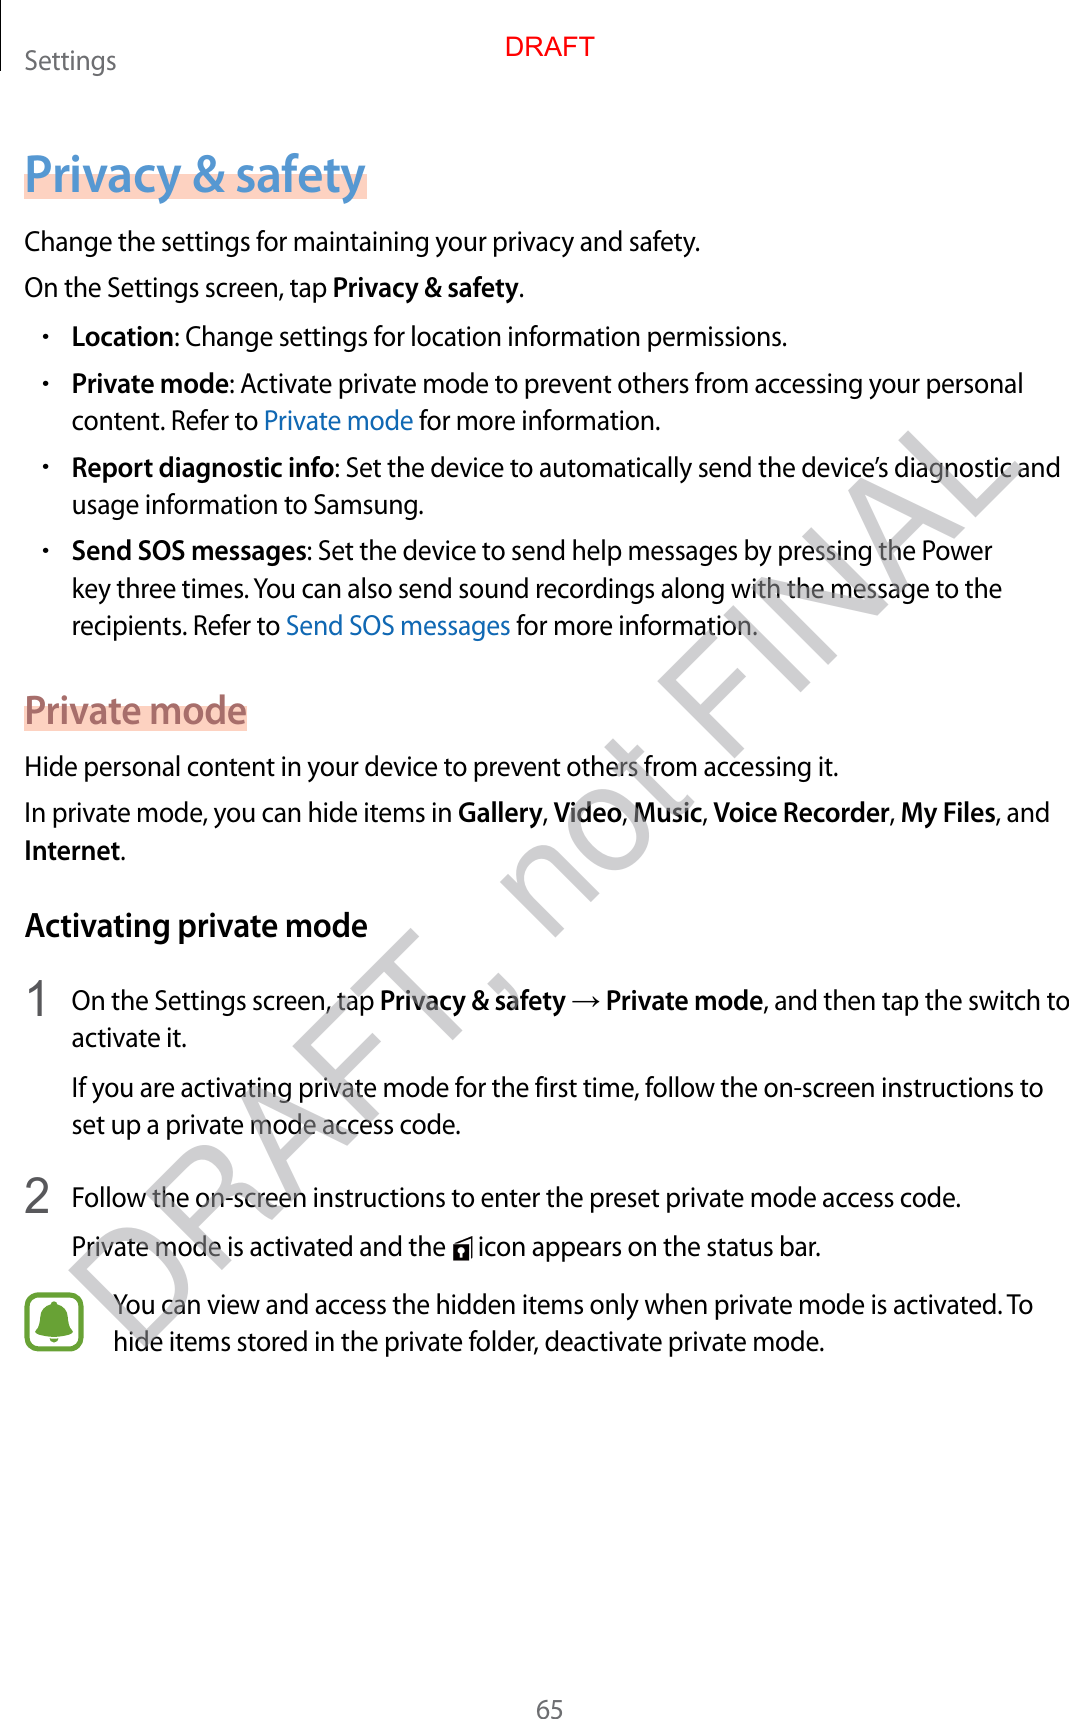 Settings65Privacy &amp; safetyChange the settings for maintaining your privacy and safety.On the Settings screen, tap Privacy &amp; safety.•Location: Change settings for location information permissions.•Private mode: Activate private mode to prevent others from accessing your personal content. Refer to Private mode for more information.•Report diagnostic info: Set the device to automatically send the device’s diagnostic and usage information to Samsung.•Send SOS messages: Set the device to send help messages by pressing the Power key three times. You can also send sound recordings along with the message to the recipients. Refer to Send SOS messages for more information.Private modeHide personal content in your device to prevent others from accessing it.In private mode, you can hide items in Gallery, Video, Music, Voice Recorder, My Files, and Internet.Activating private mode1  On the Settings screen, tap Privacy &amp; safety → Private mode, and then tap the switch to activate it.If you are activating private mode for the first time, follow the on-screen instructions to set up a private mode access code.2  Follow the on-screen instructions to enter the preset private mode access code.Private mode is activated and the   icon appears on the status bar.You can view and access the hidden items only when private mode is activated. To hide items stored in the private folder, deactivate private mode.DRAFTDRAFT, not FINAL